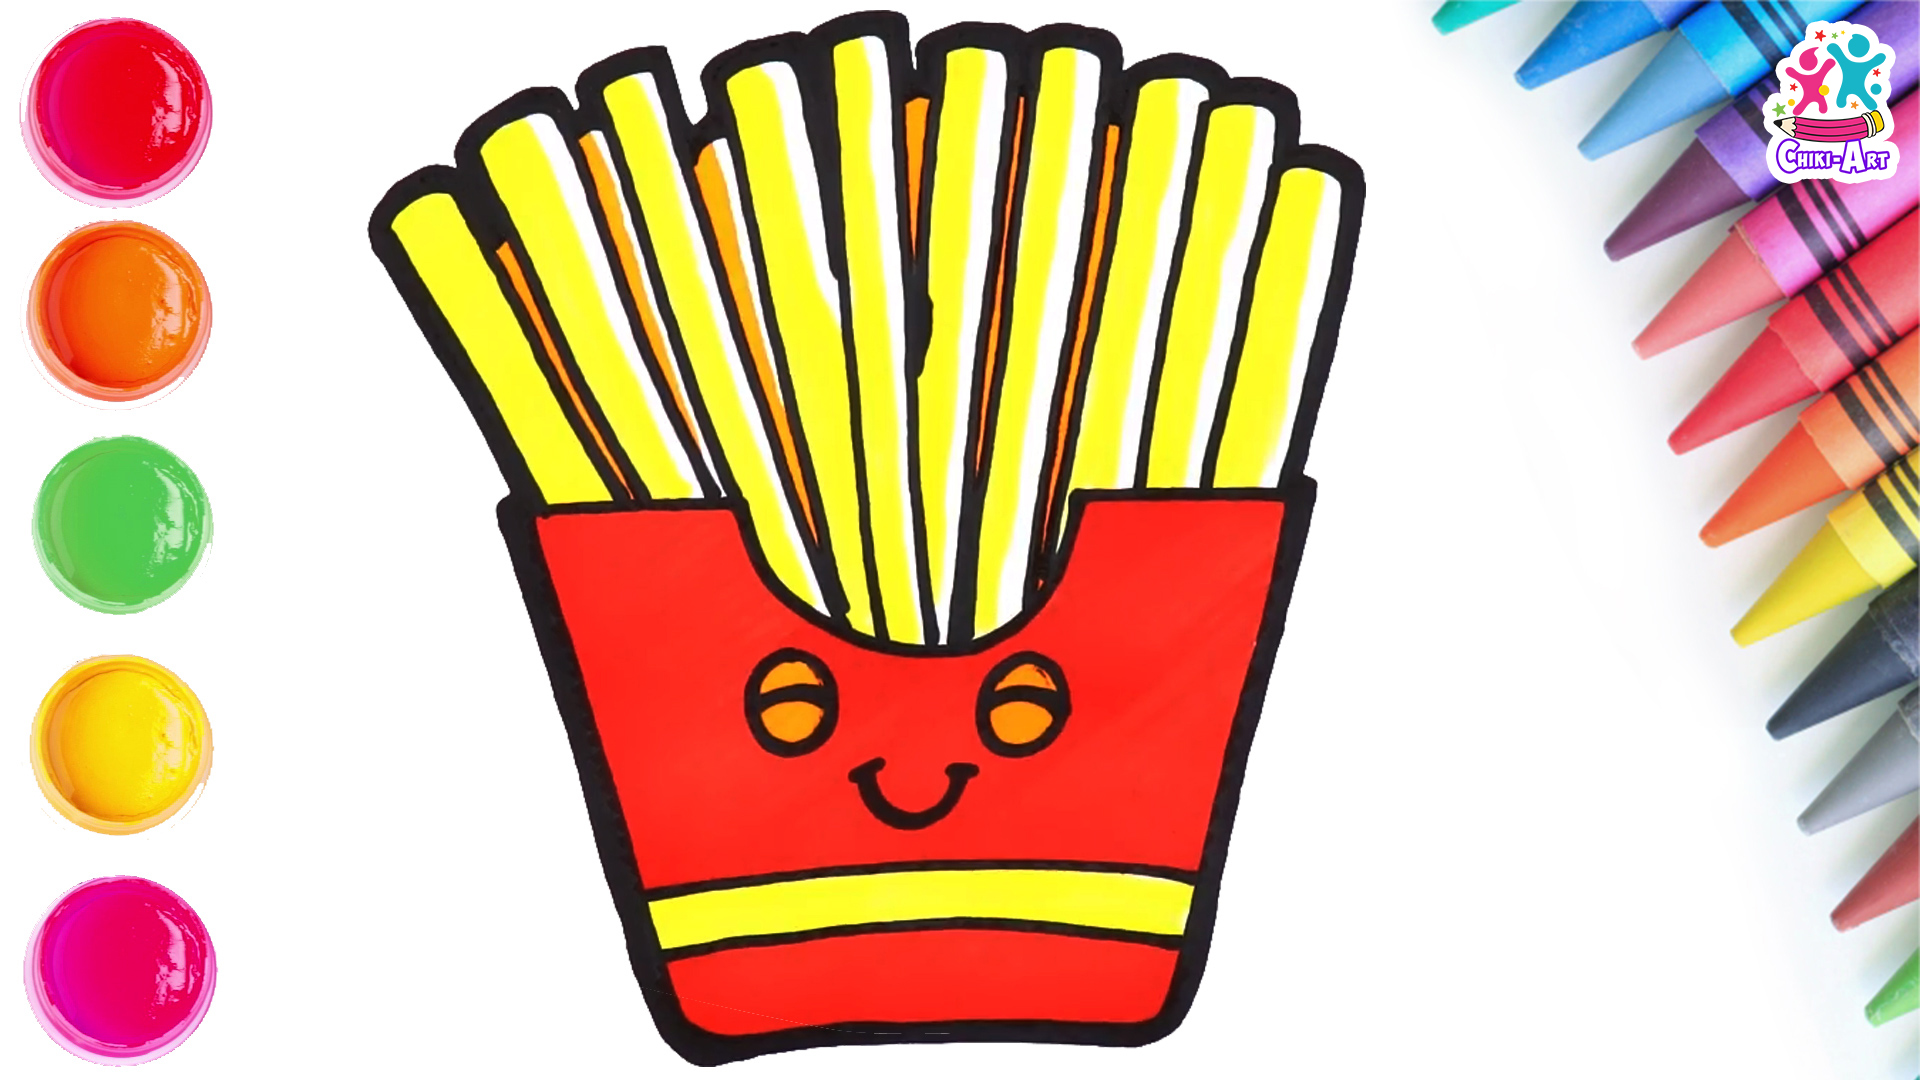 French Fries Drawing - Free Transparent PNG Clipart Images Download